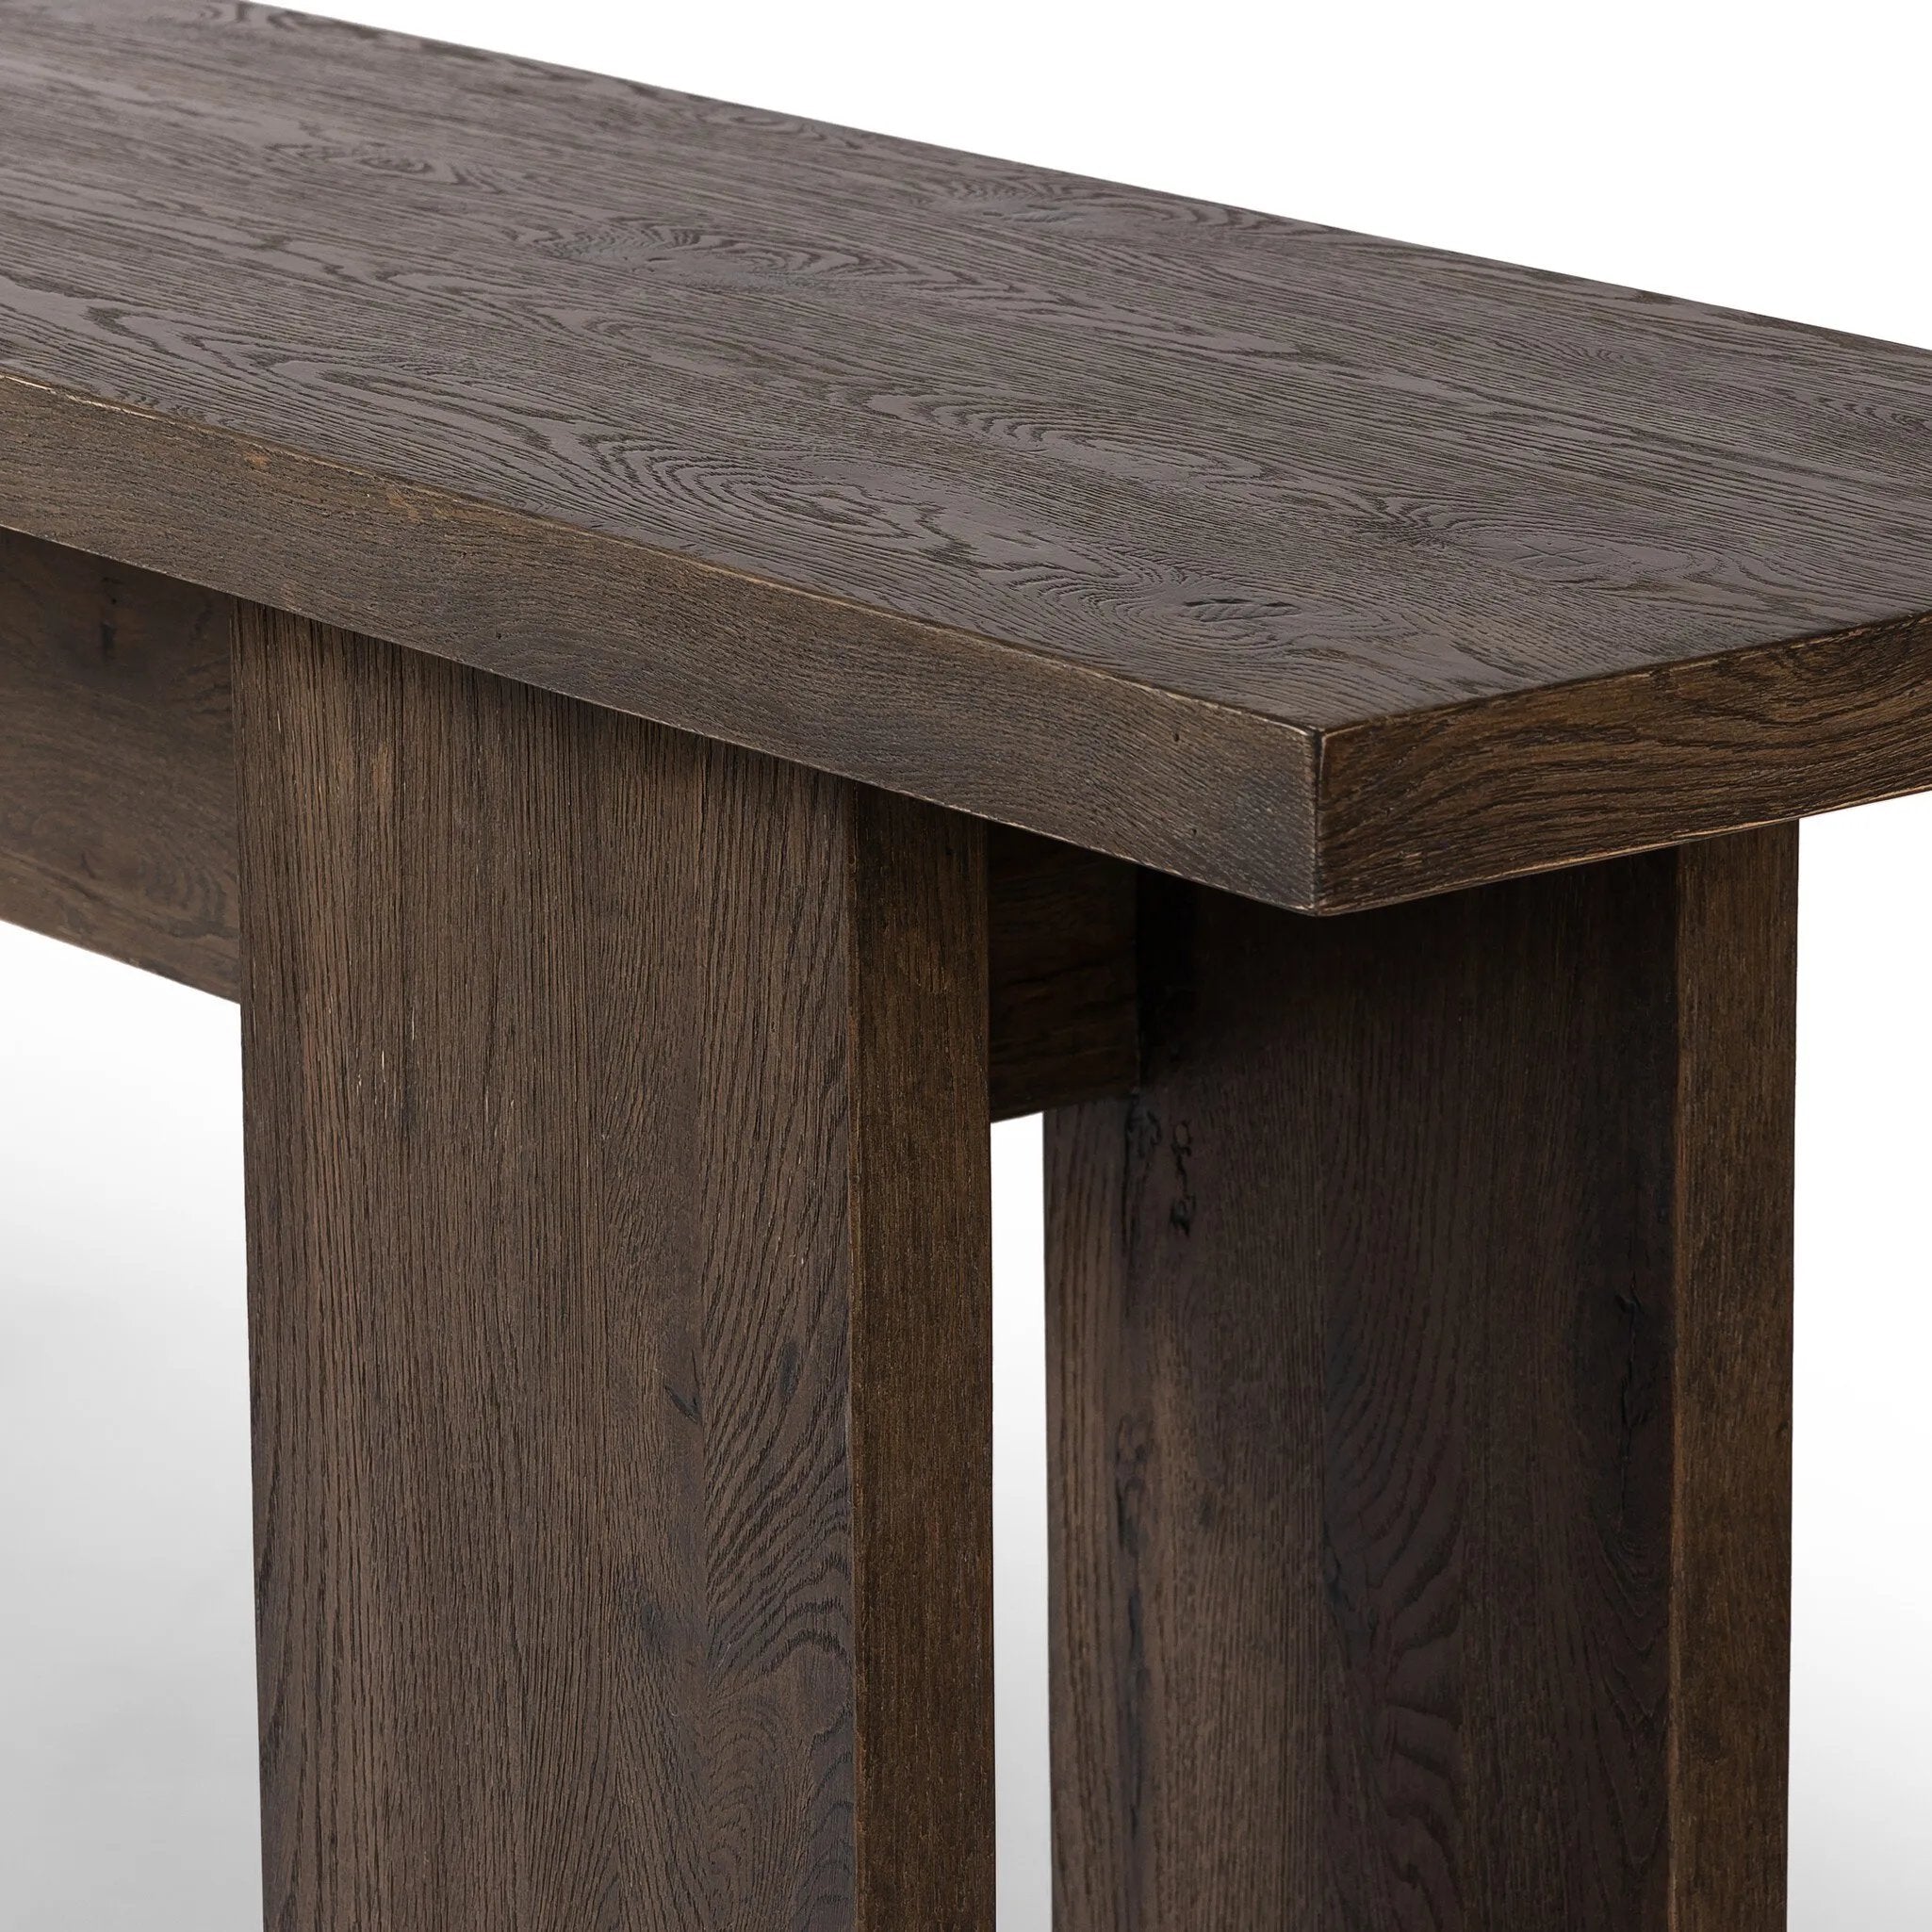 With wide proportions and natural presence, an open-style console table of dark grey oak veneer features beautiful natural texture.Collection: Irondal Amethyst Home provides interior design, new home construction design consulting, vintage area rugs, and lighting in the Park City metro area.